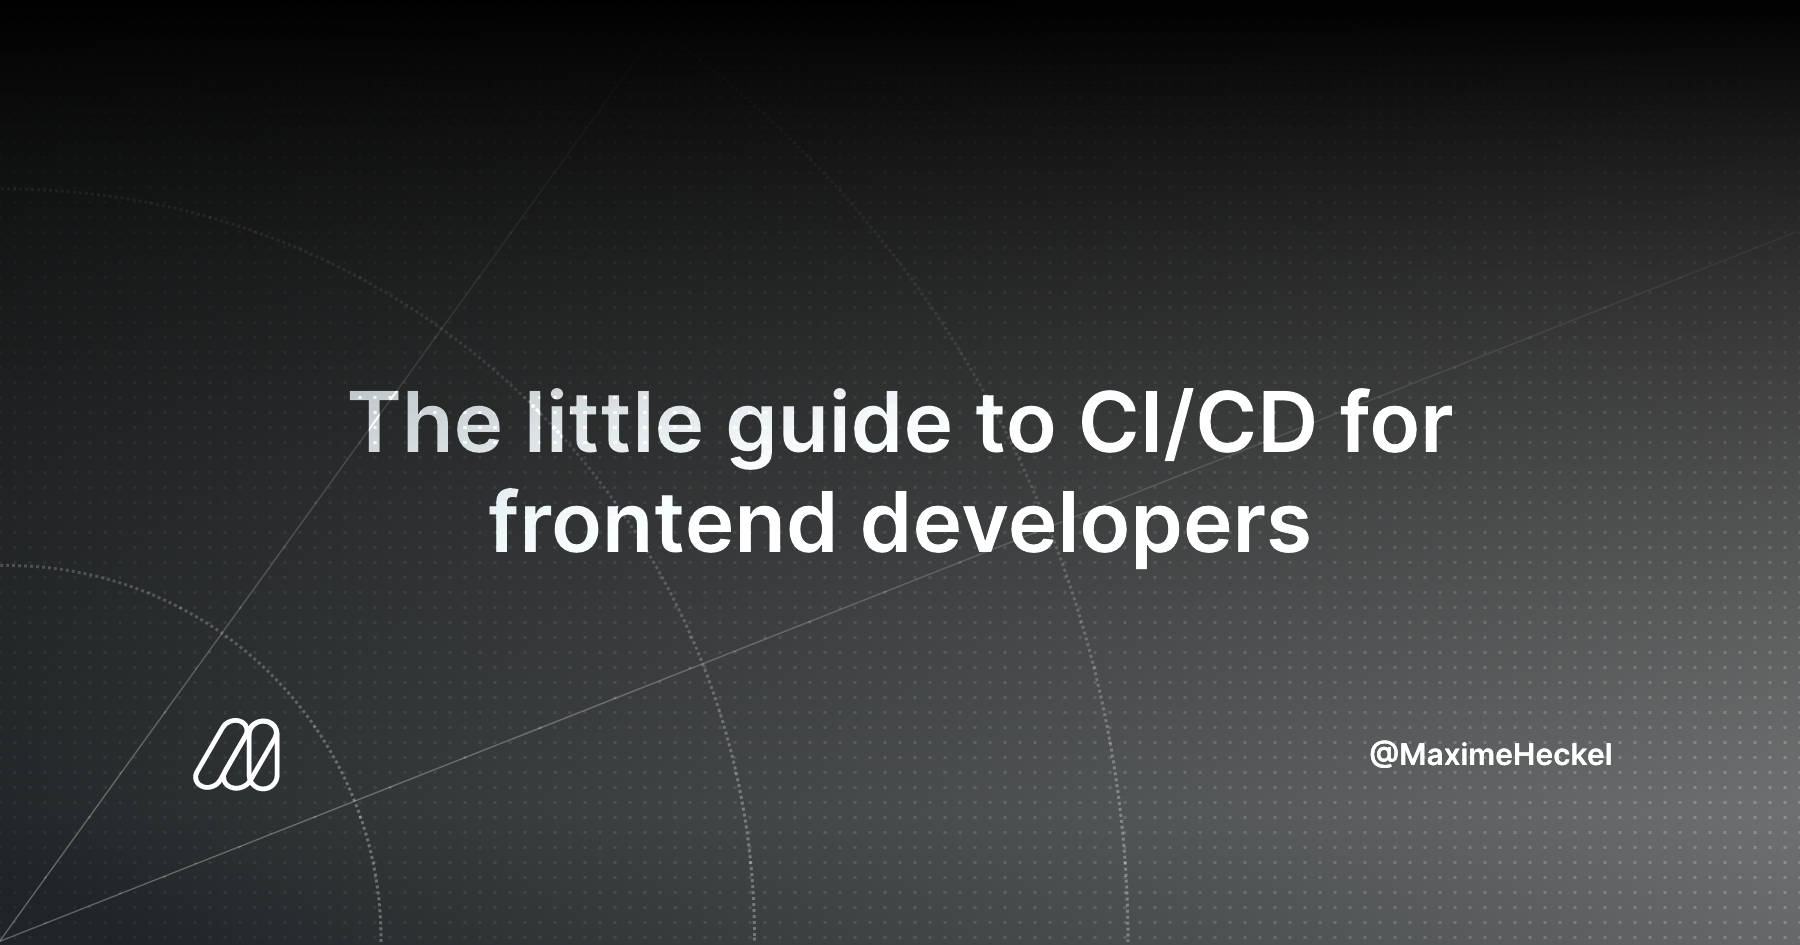 The little guide to CI/CD for frontend developers - Maxime Heckel's ... image